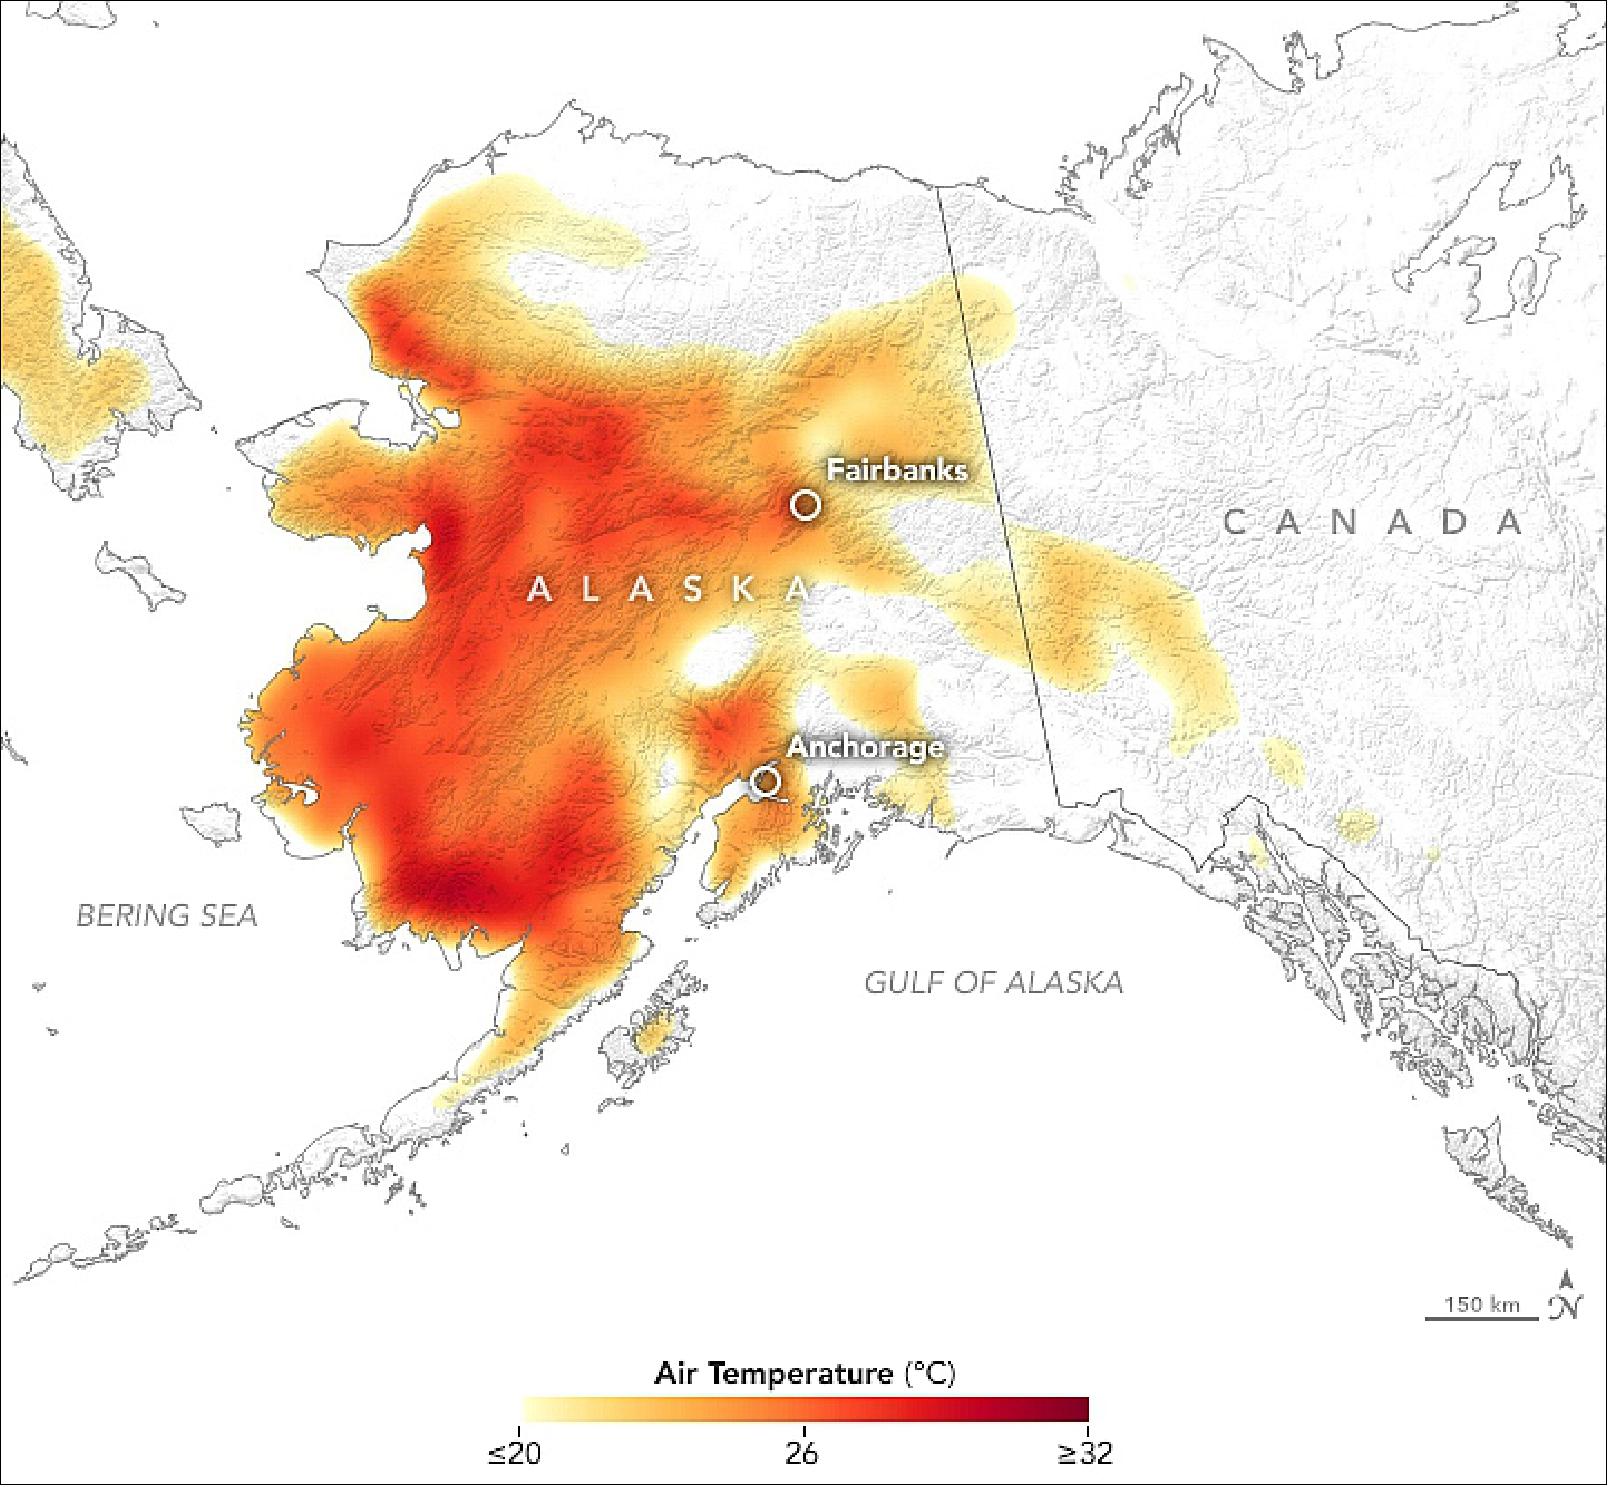 Figure 26: Record-breaking heat has exacerbated clusters of wildfires burning throughout the state. This map shows air temperatures at 2 meters above the ground on July 8, 2019. The near real-time temperature data come from the GEOS forward processing (GEOS-FP) model, which assimilates observations of air temperature, moisture, pressure, and wind speeds from satellites, aircraft, and ground-based observing systems. The darkest red areas had temperatures approaching 32ºC (90ºF), image credit: NASA Earth Observatory, image by Lauren Dauphin, using MODIS data from NASA EOSDIS/LANCE and GIBS/Worldview and GEOS-5 data from the Global Modeling and Assimilation Office at NASA GSFC. Story by Adam Voiland.